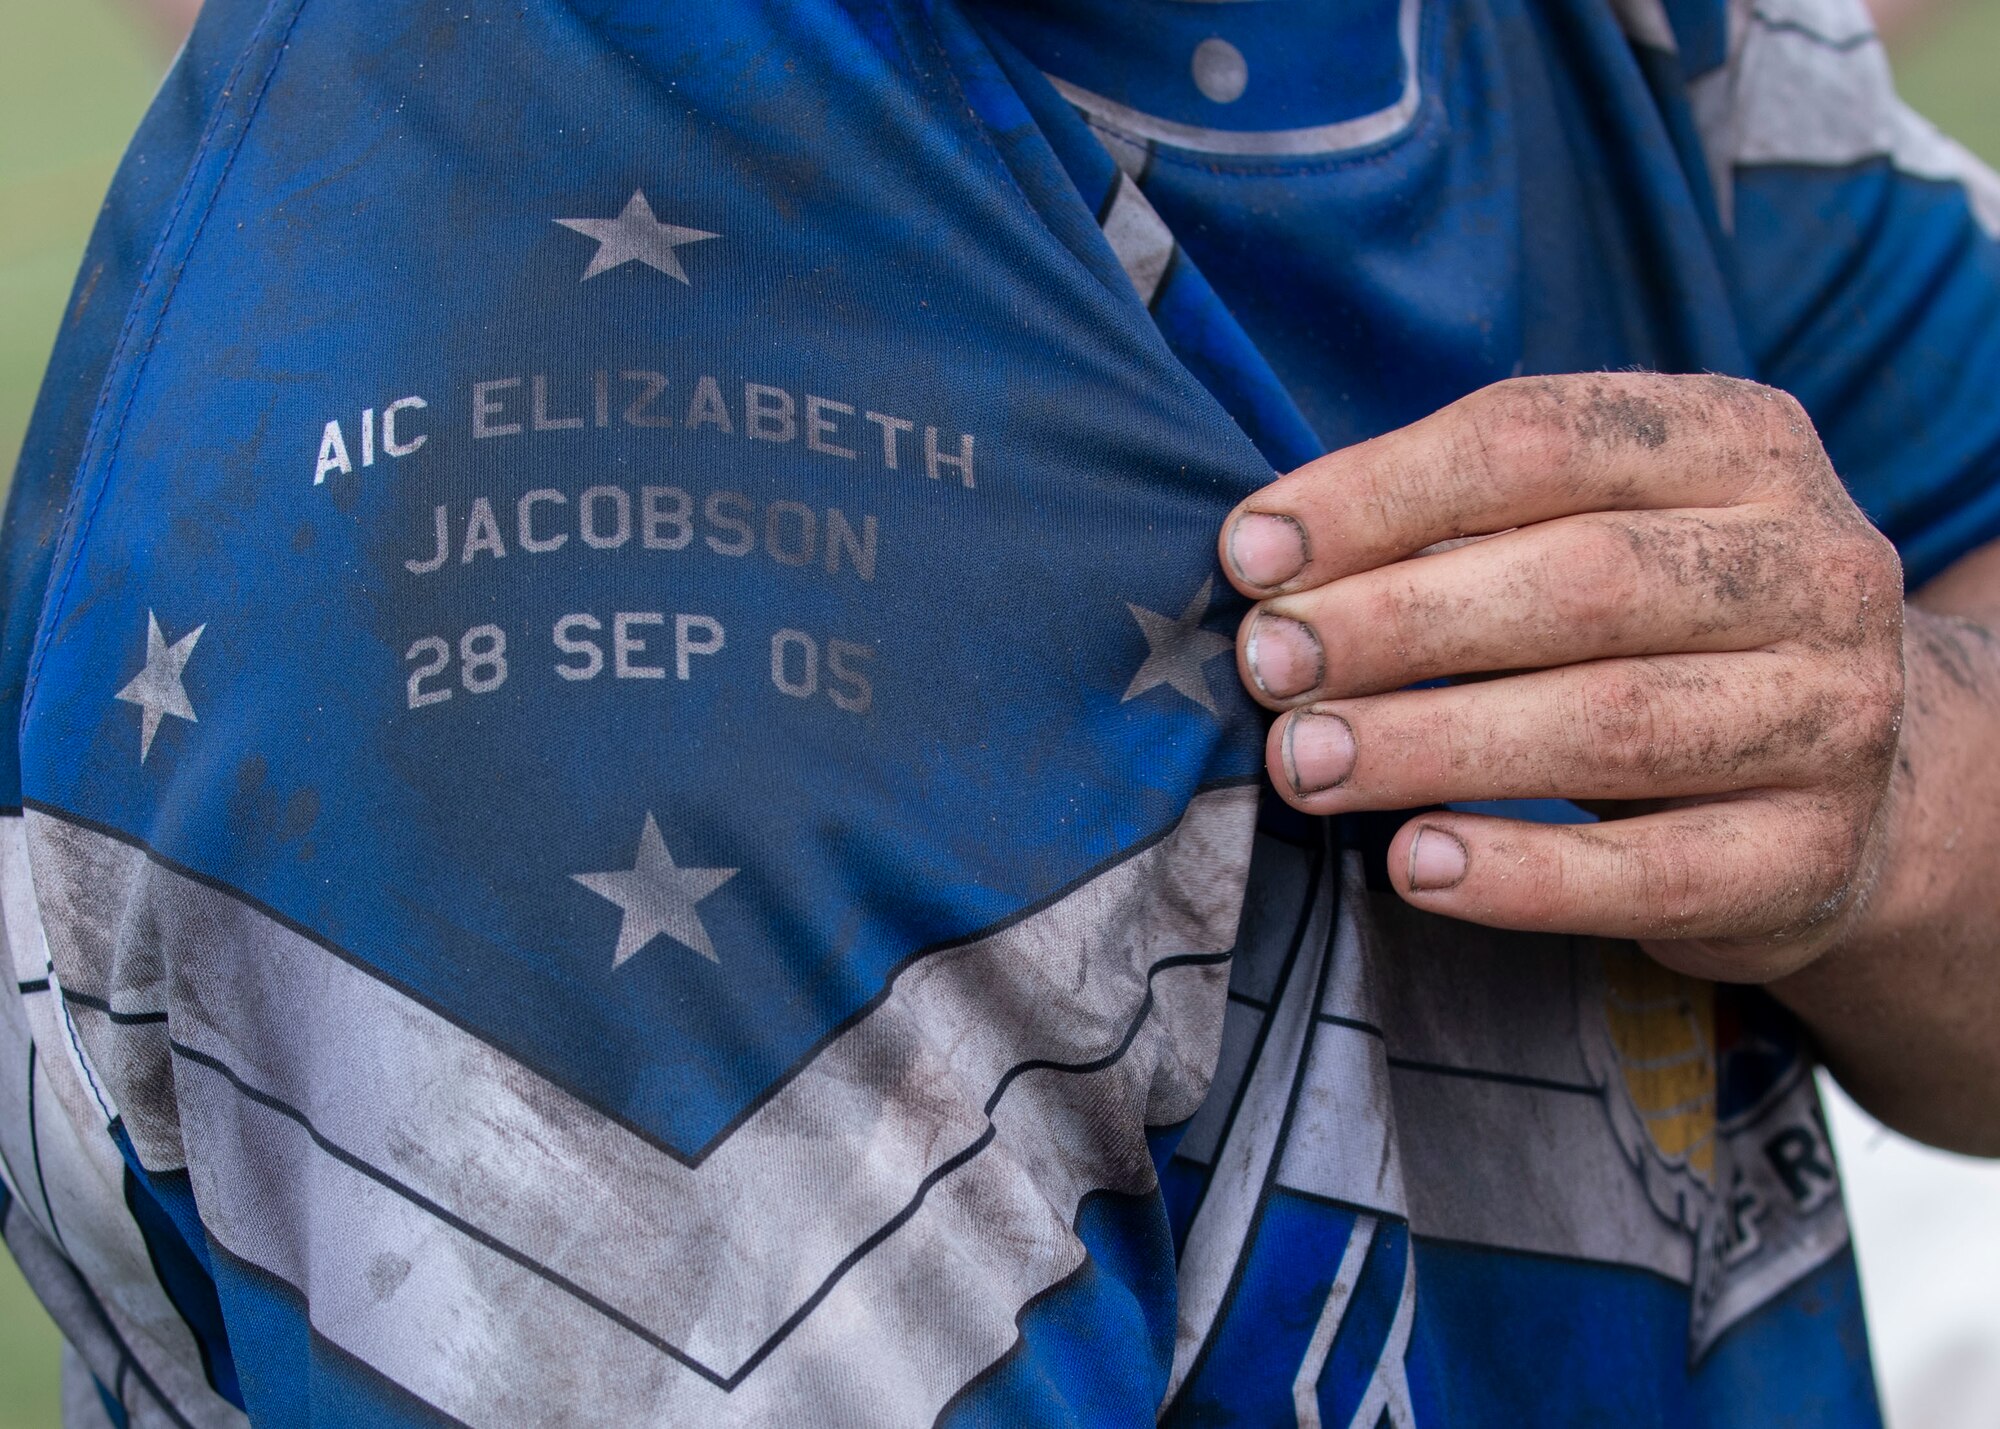 Tech. Sgt. Jessica Tharp, United States Air Force women’s rugby player, displays the name of a fallen Air Force service member on her sleeve at the Annual Armed Forces Women’s Rugby Championship in Wilmington, North Carolina, June 26, 2021.